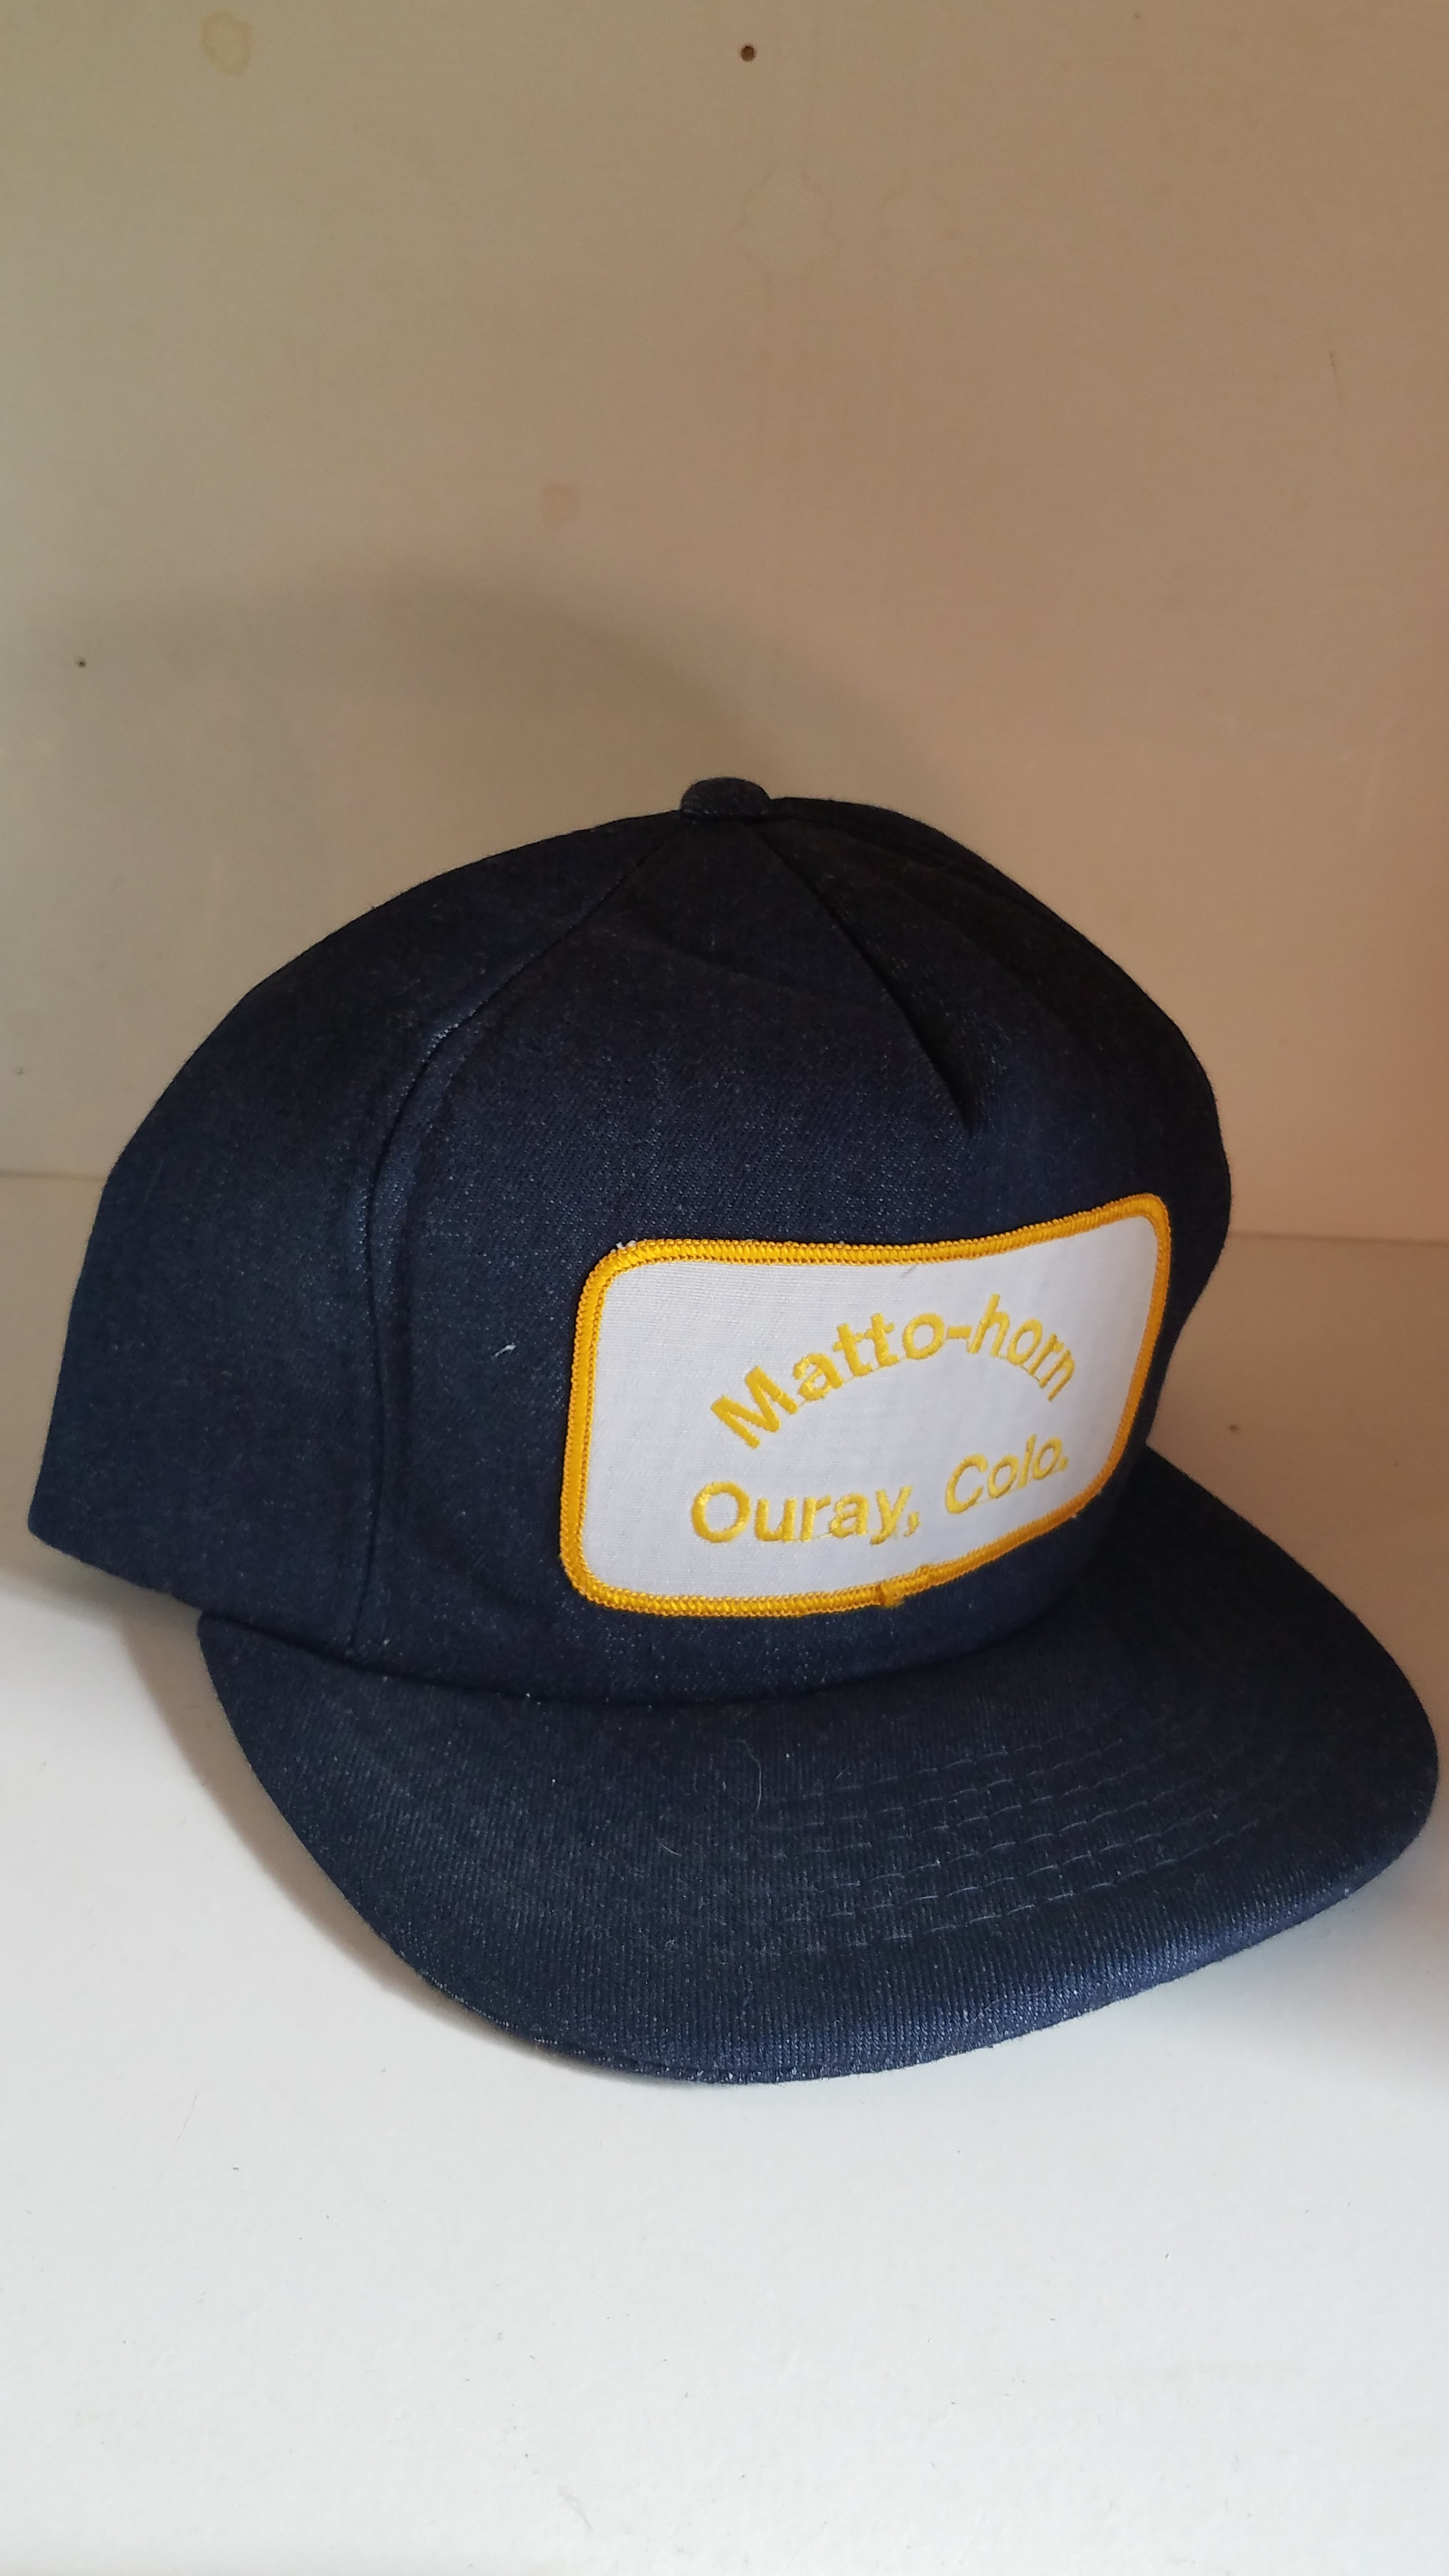 Vintage Snapback Matto-Horn, Ouray, Colo. Hat